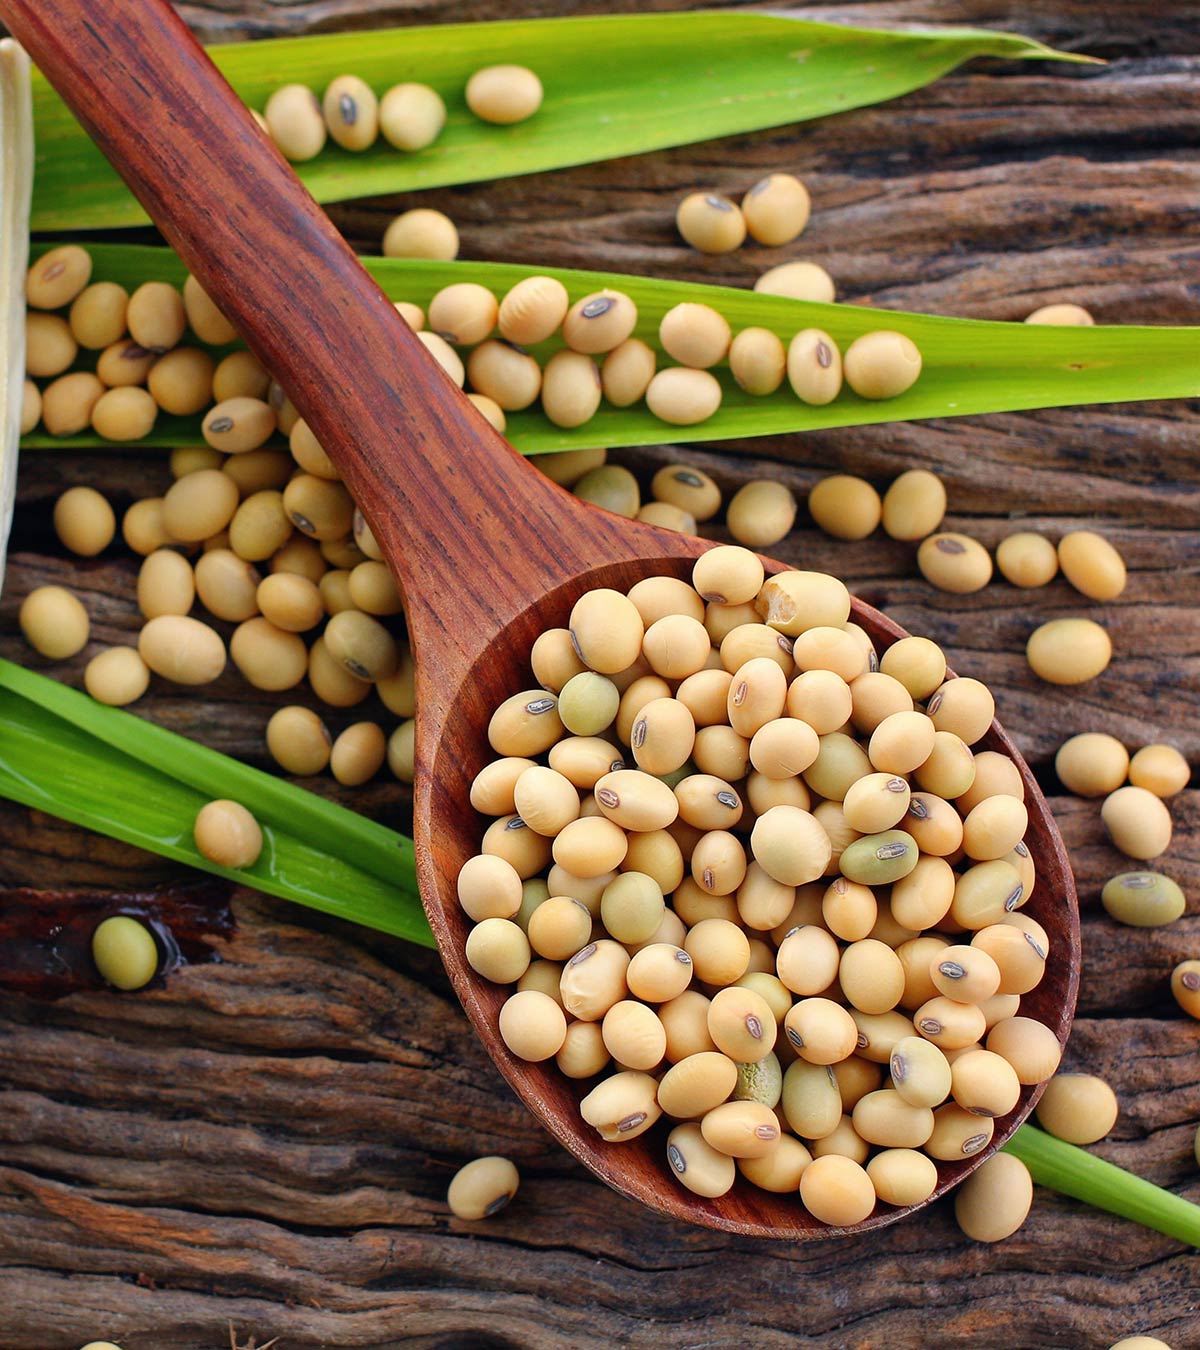 Soy beans reduce the risk of type 2 diabete